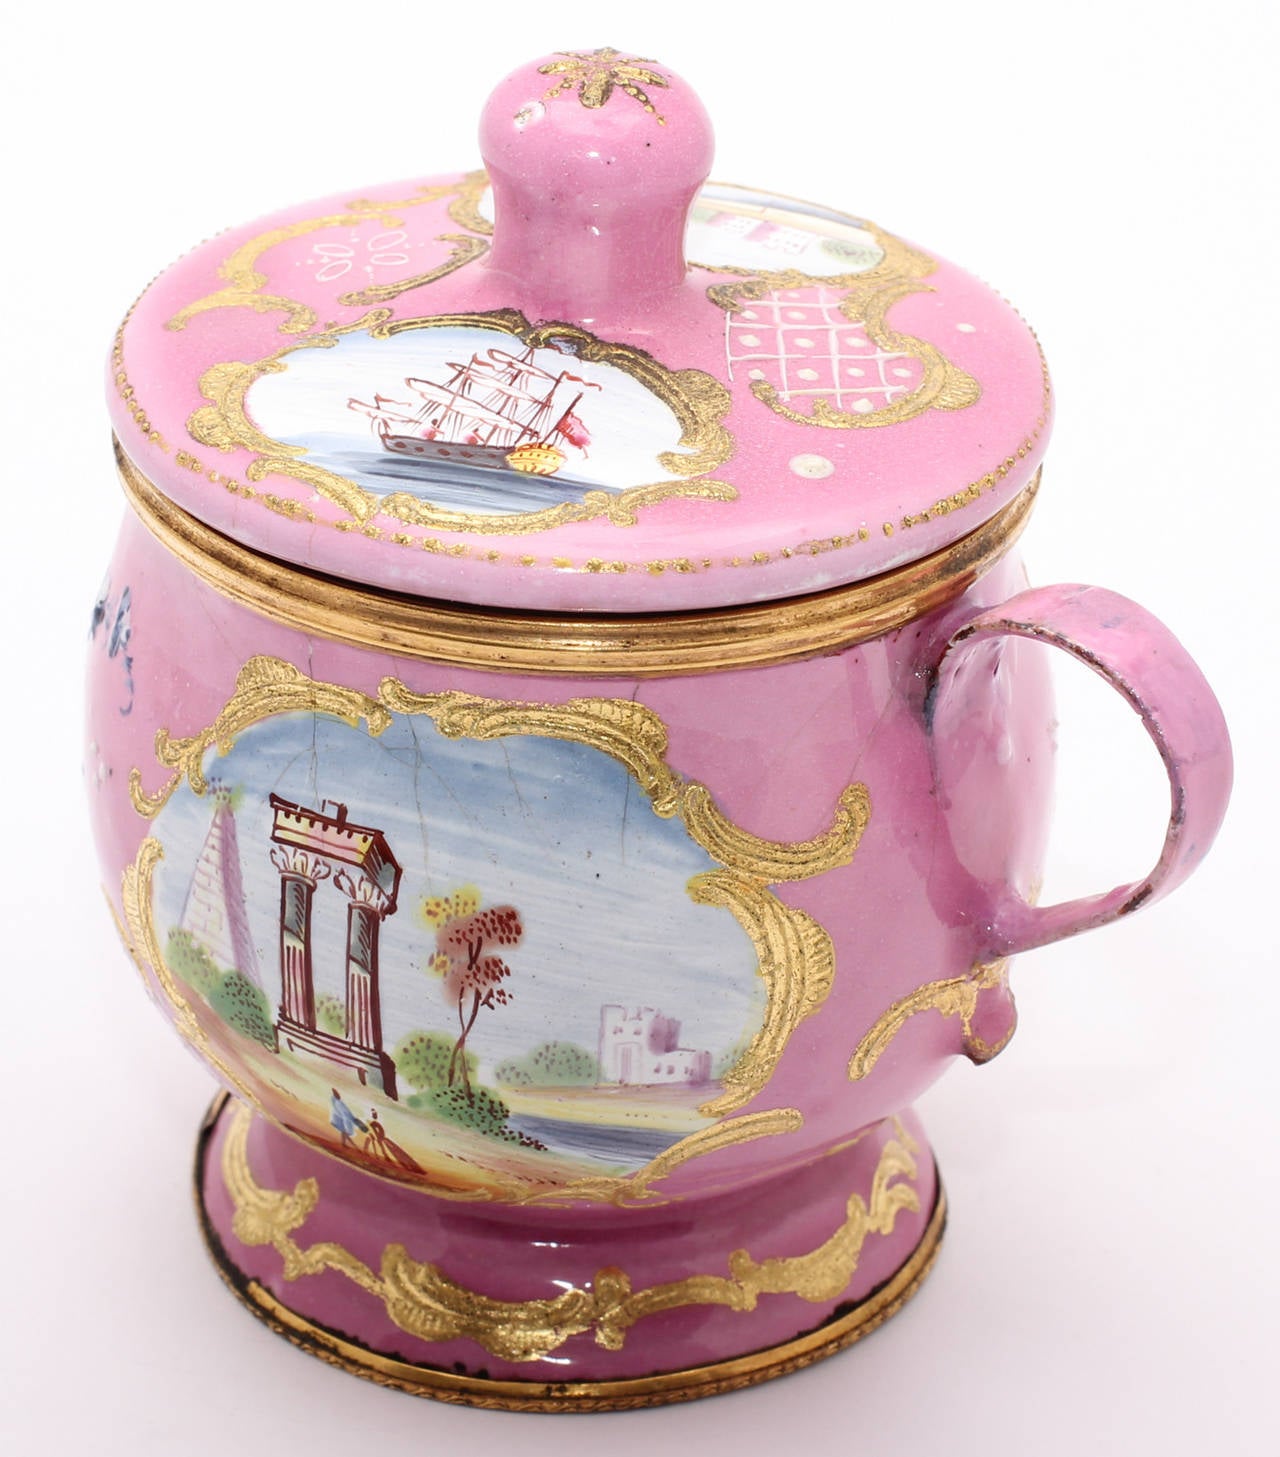 Rare English enamel covered cup or mustard pot, of typical form, decorated in bright pink ground with reserved panels of landscapes, including figures before a landscape and a fully rigged ship, with raised gold rococo frames and flourishes.     